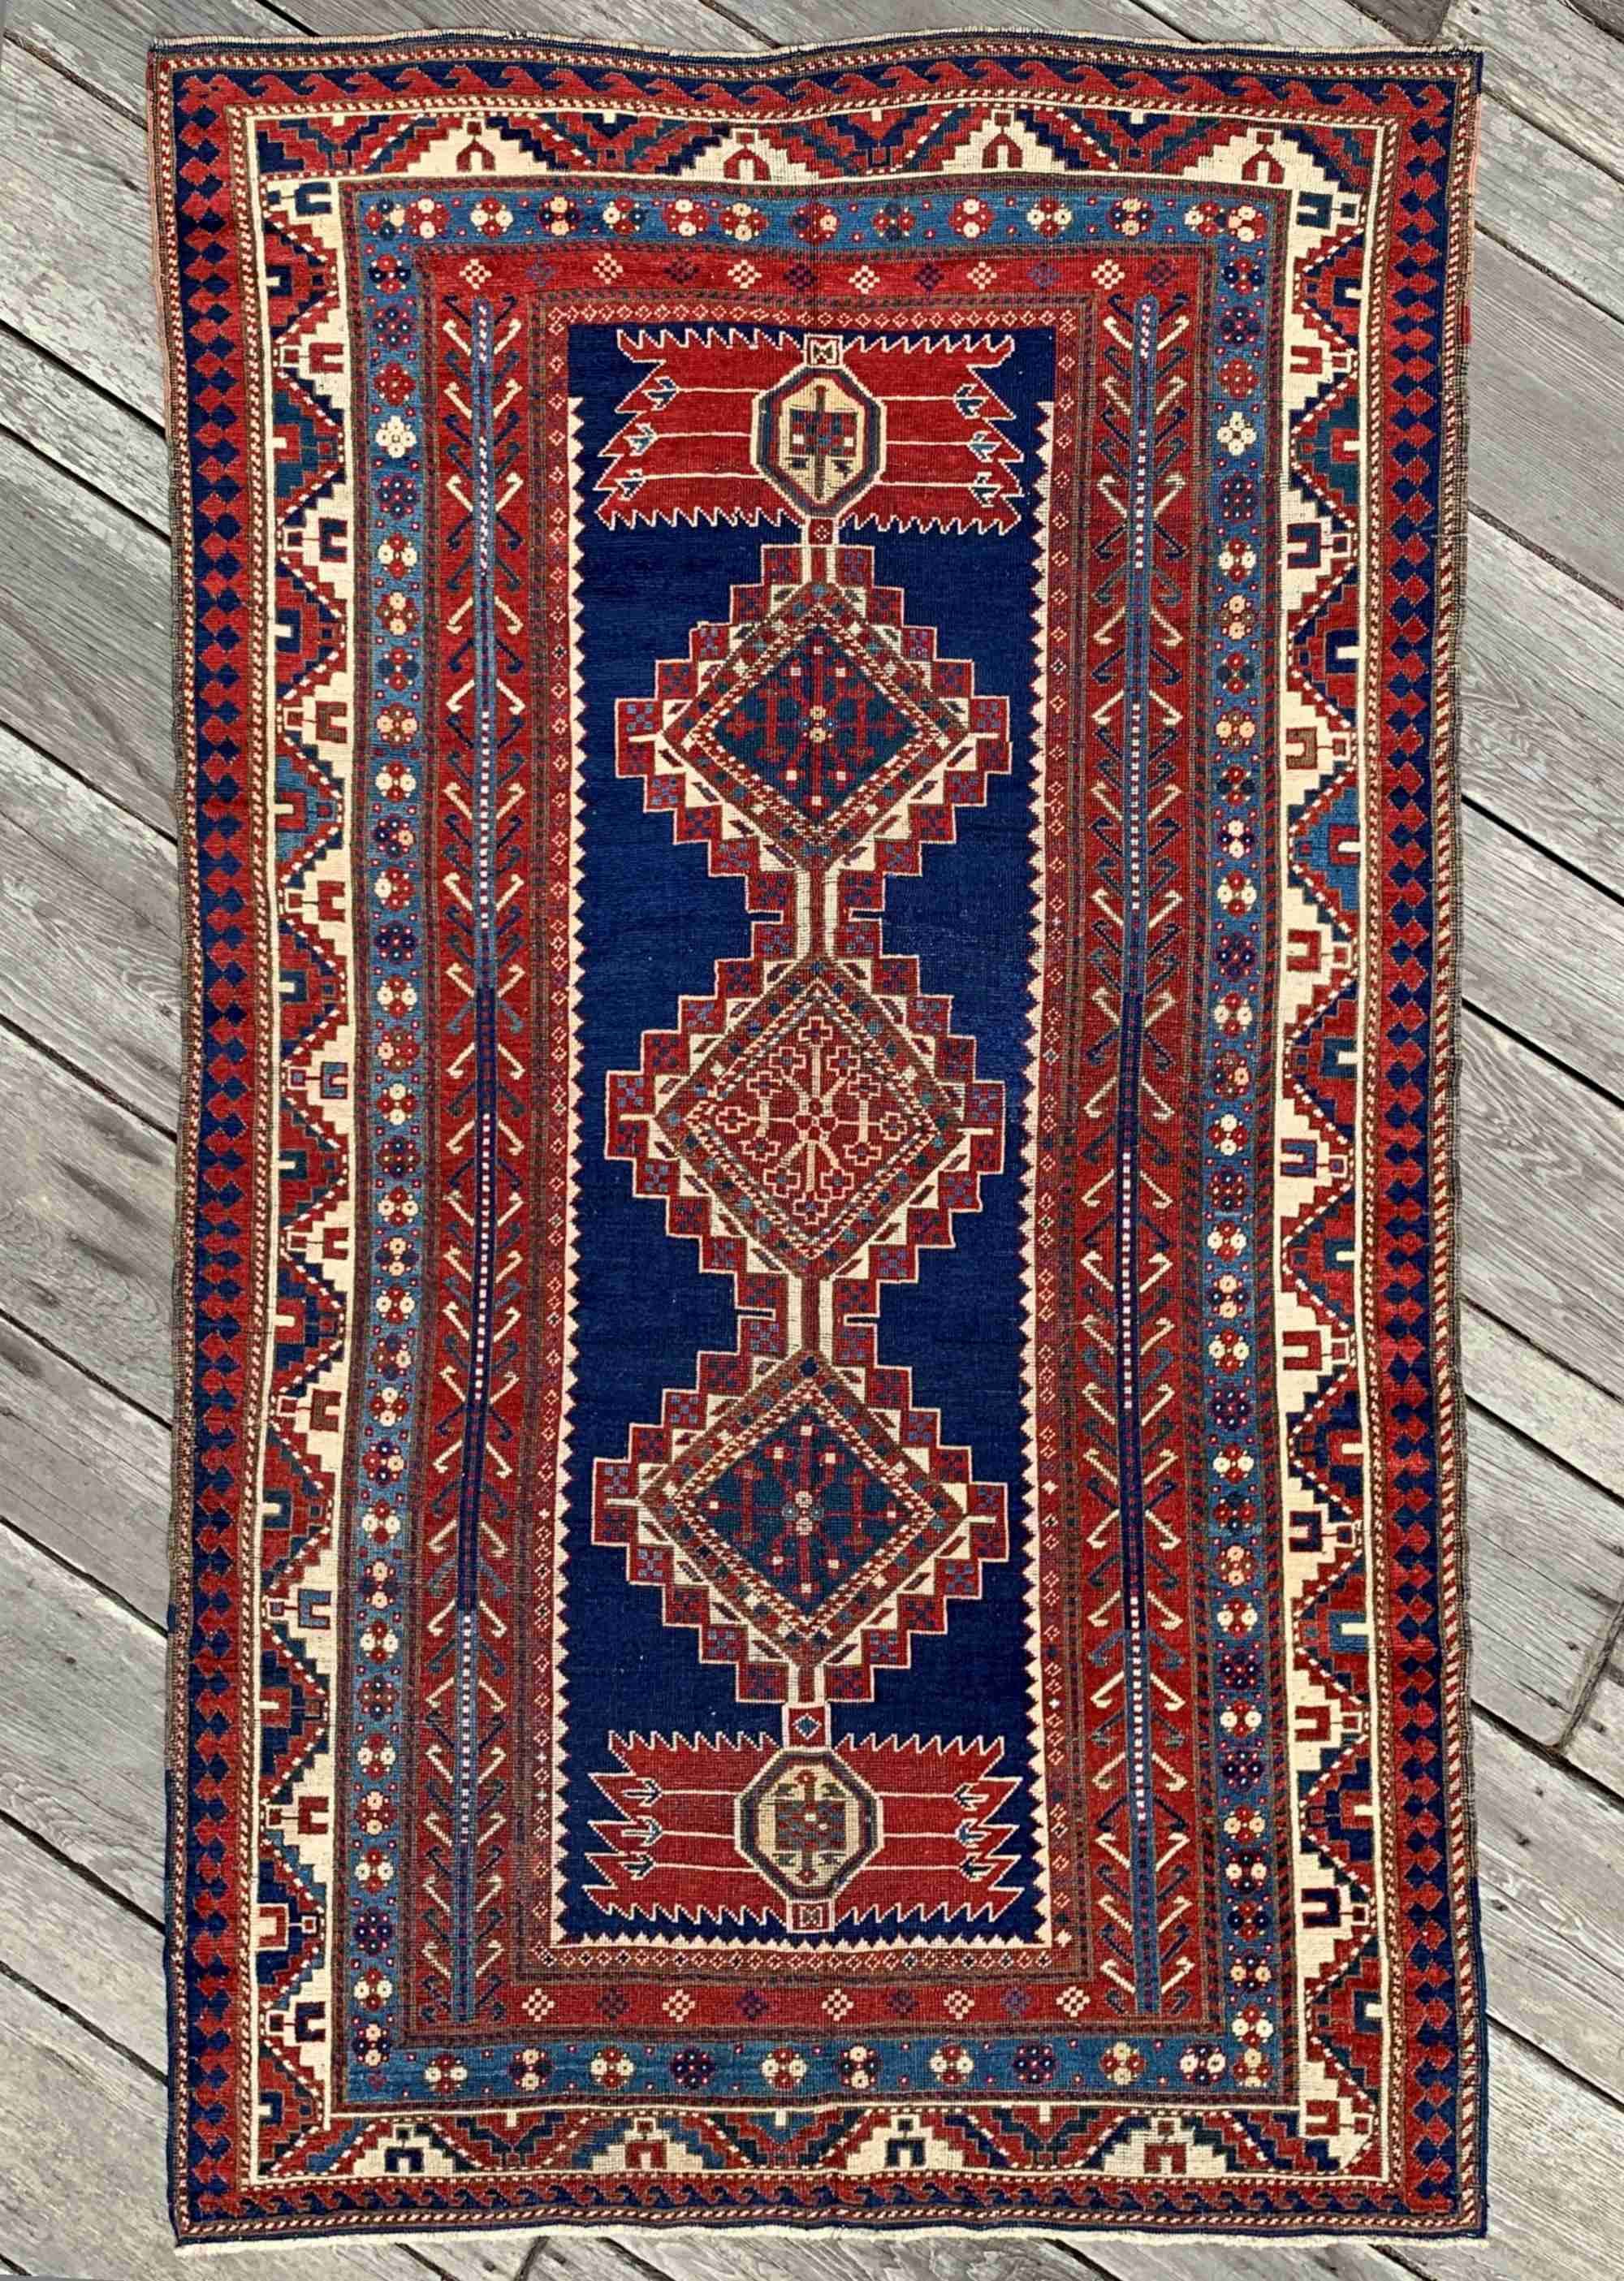 Steelman Rugs — Shop vintage rugs and antique rugs online at 